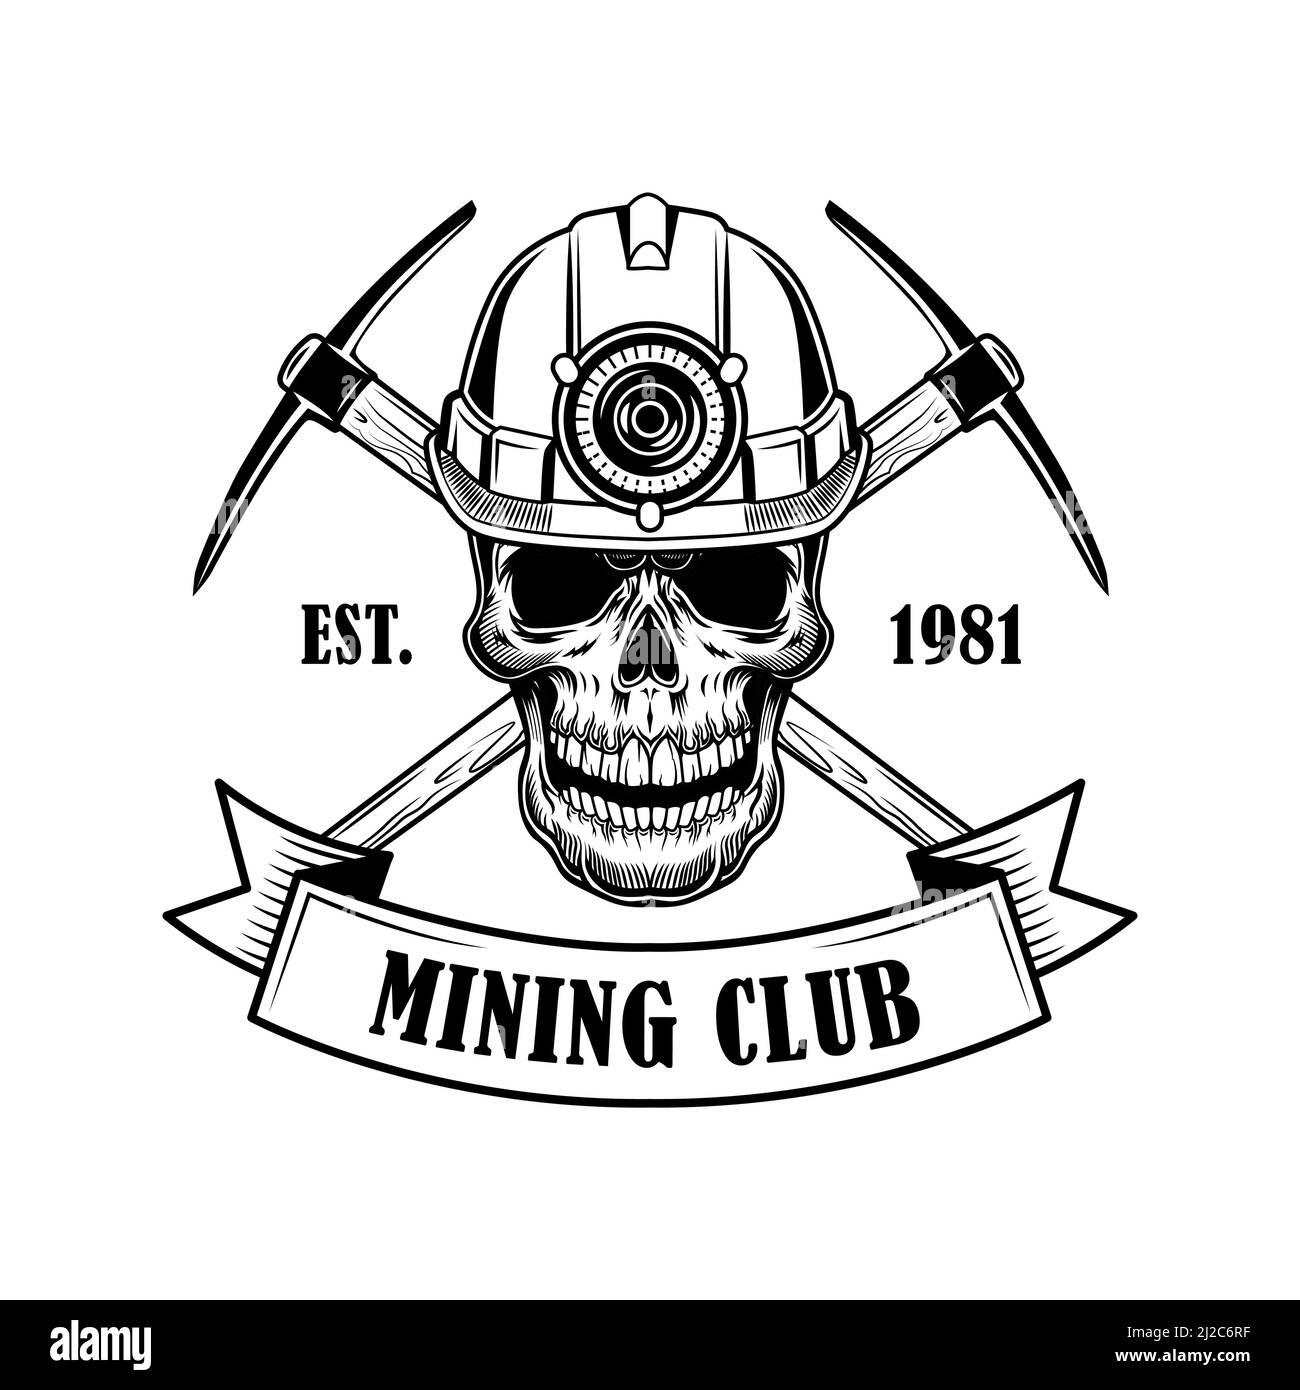 Coal miners skull vector illustration. Head of skeleton in helmet with torch, crossed twibills and text. Coal mining tools concept for emblems and bad Stock Vector